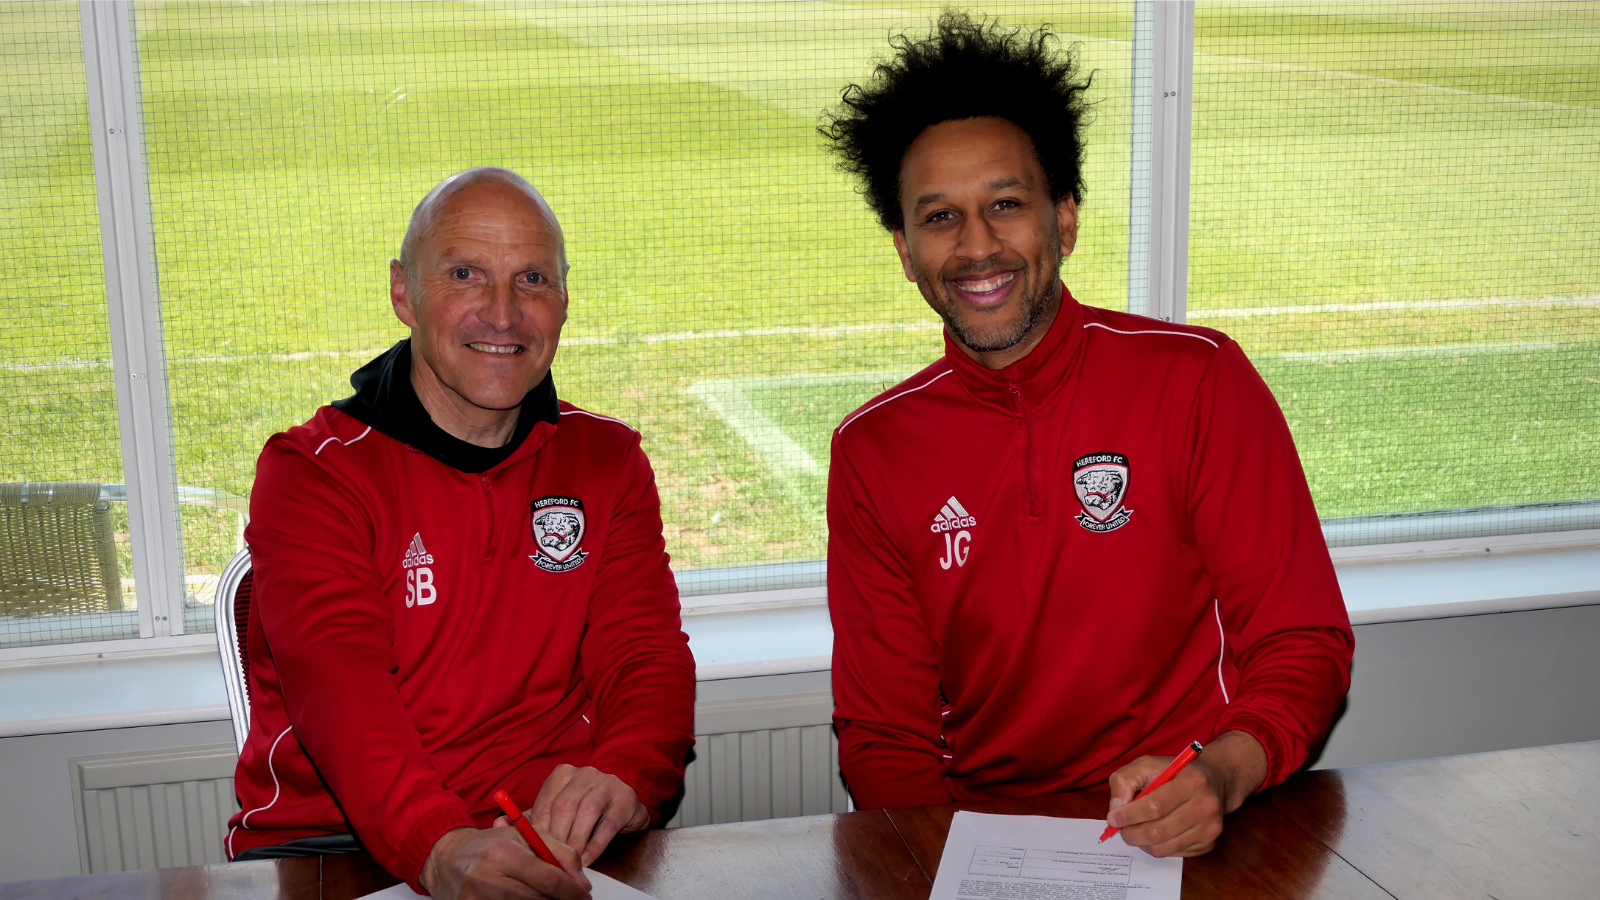 FOOTBALL | Gowling and Burr sign two-year deals with the Bulls